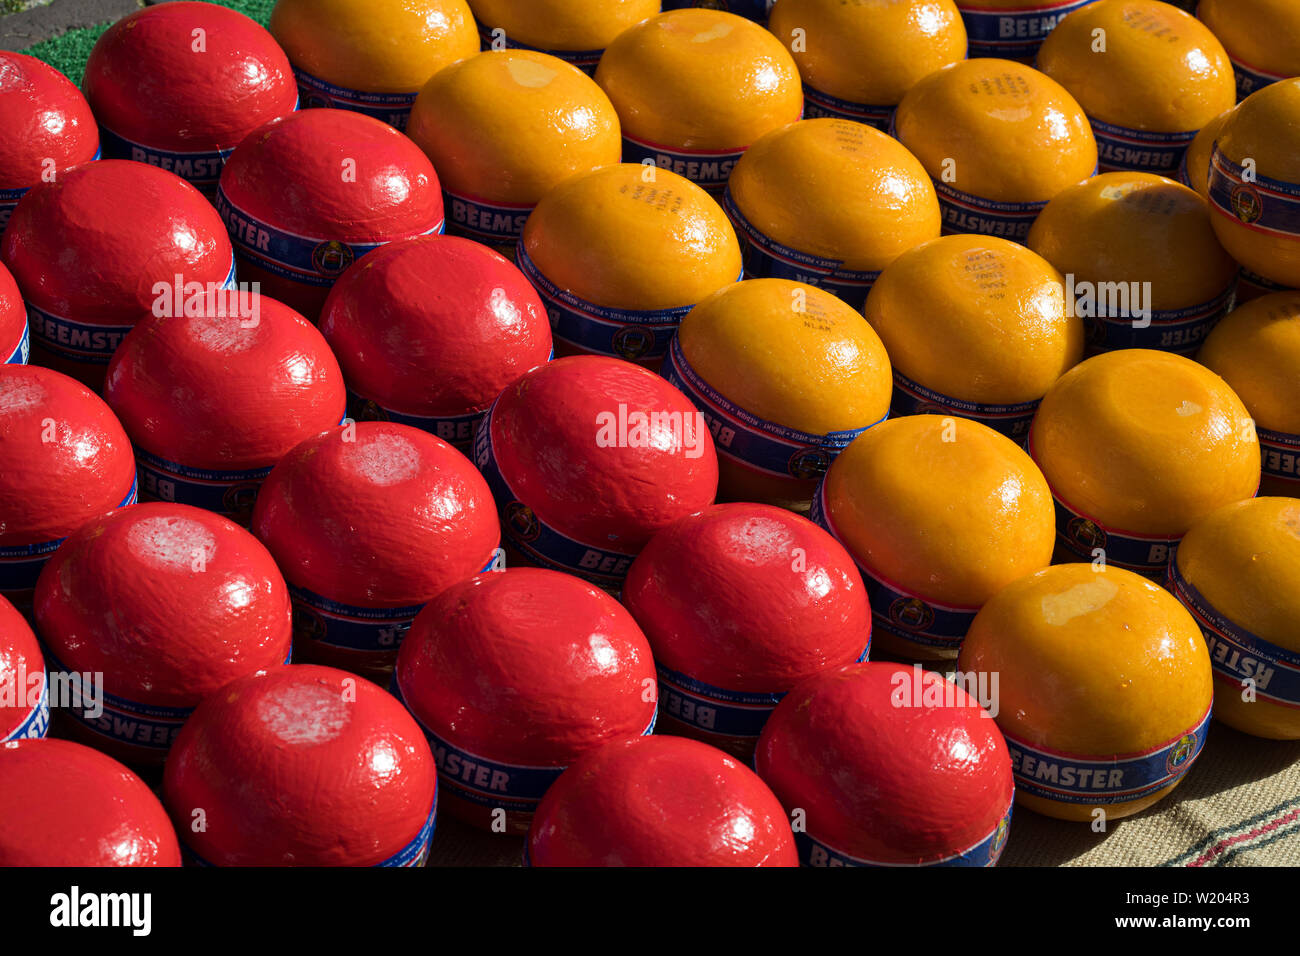 Edam, Netherlands - July 2019: Edam cheeses at the first cheese market of the season Stock Photo